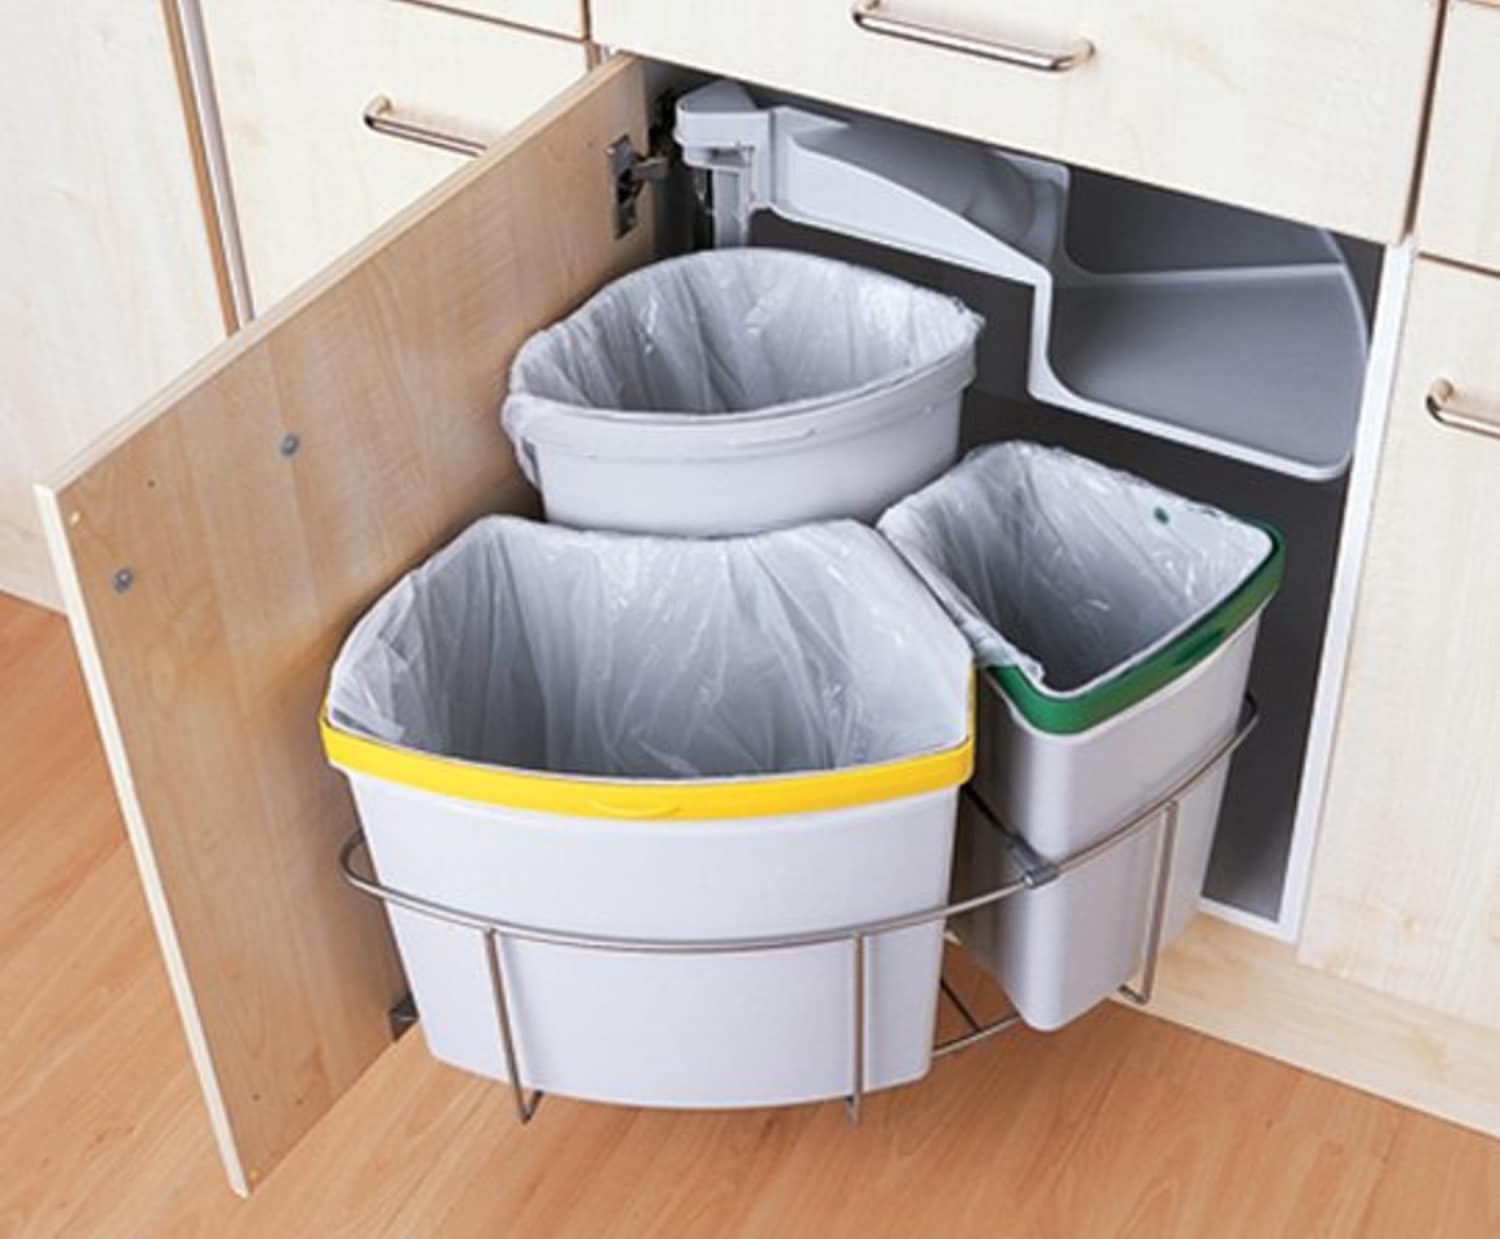 trash can or sink is required to do this sims 4